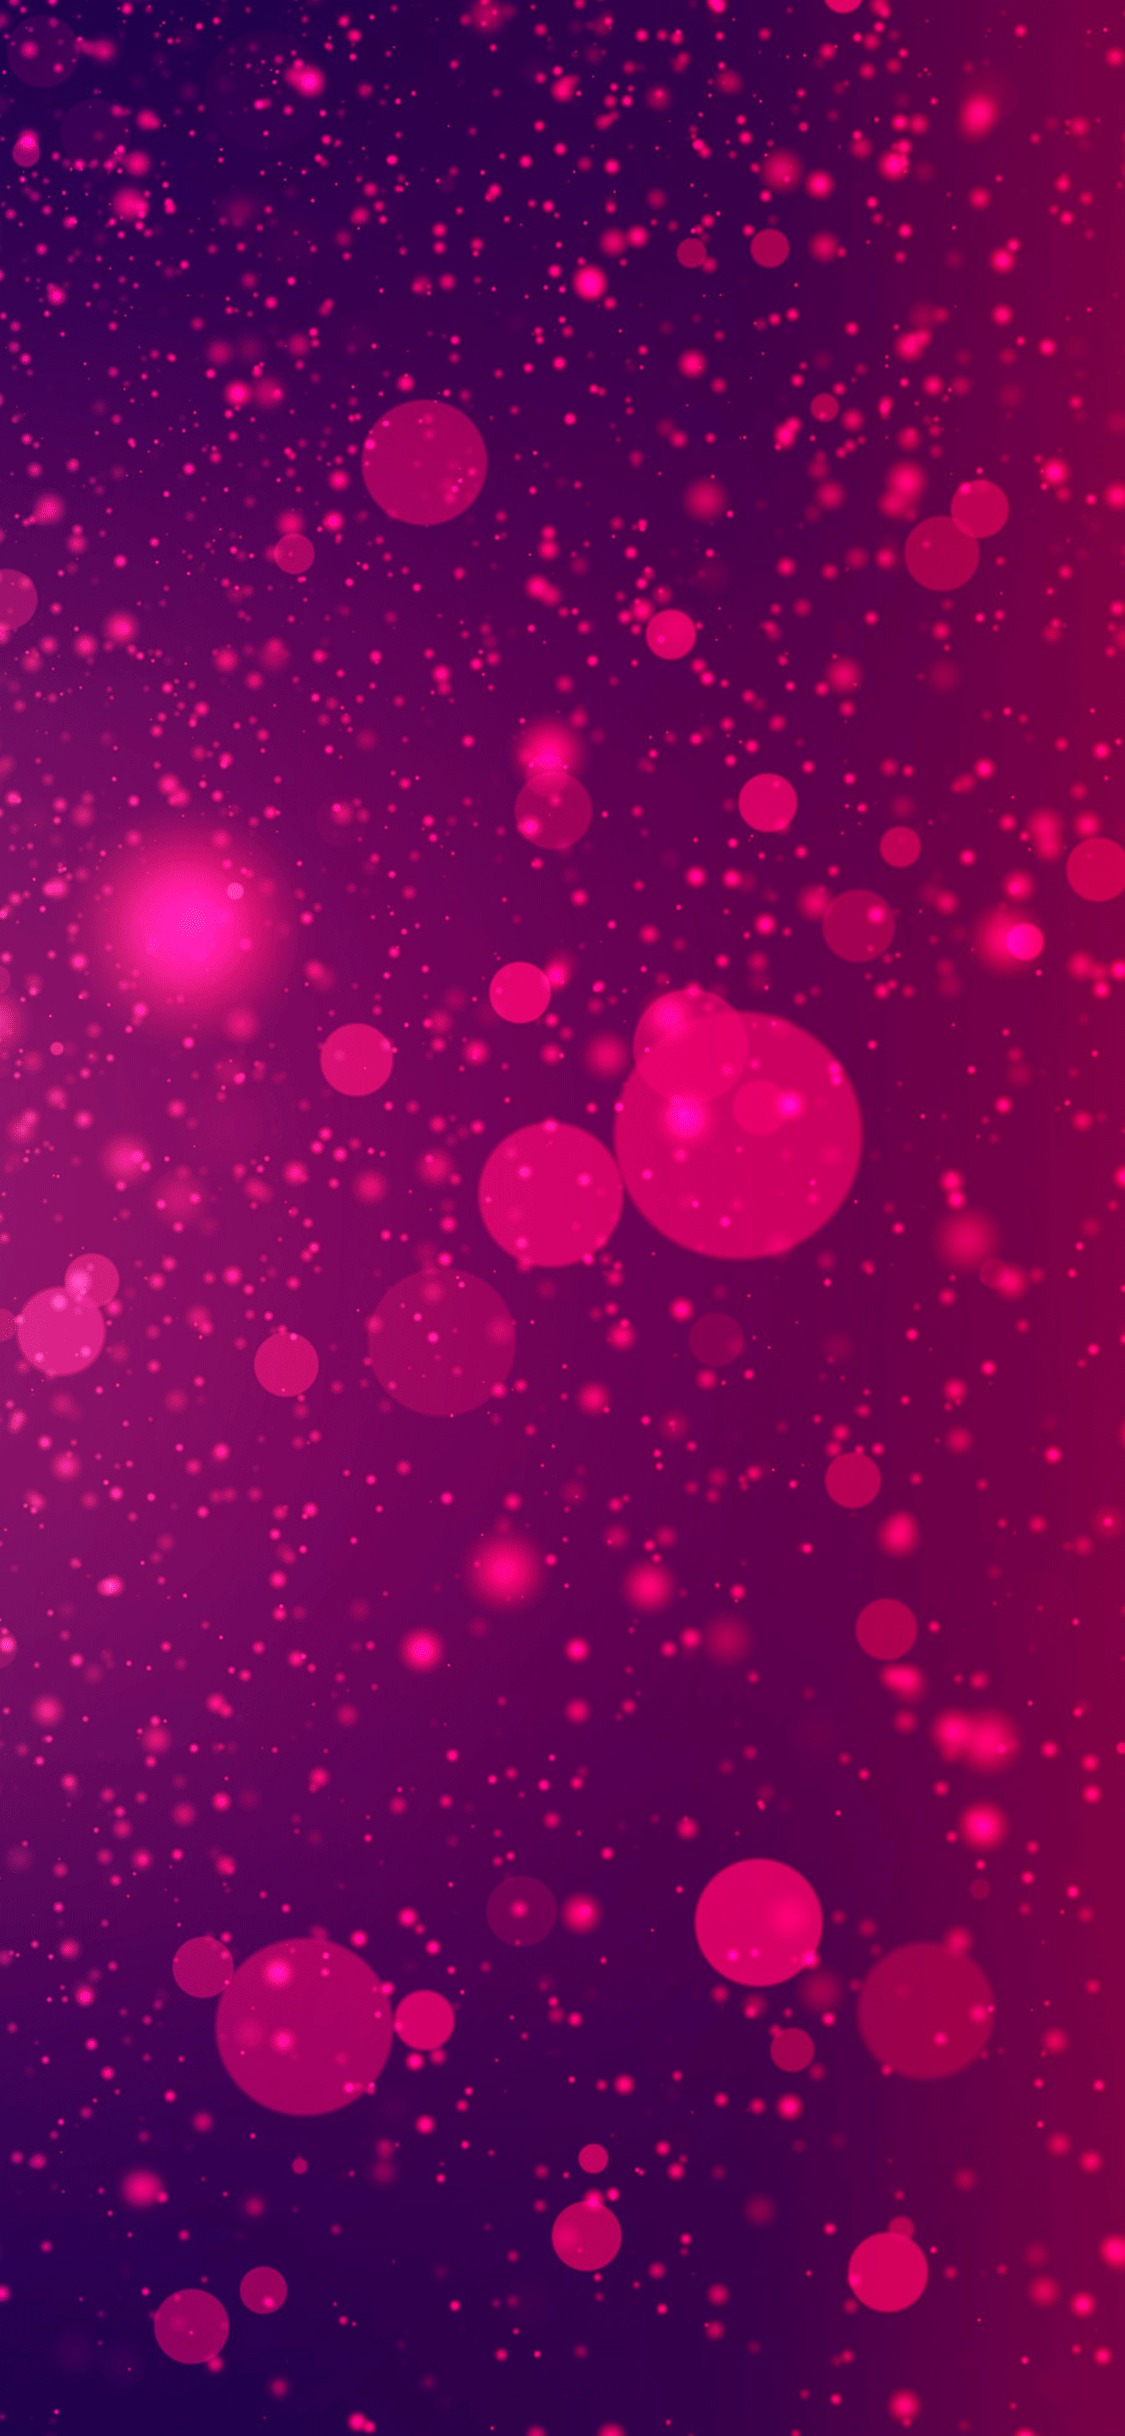 Pink Abstract iPhone Wallpaper